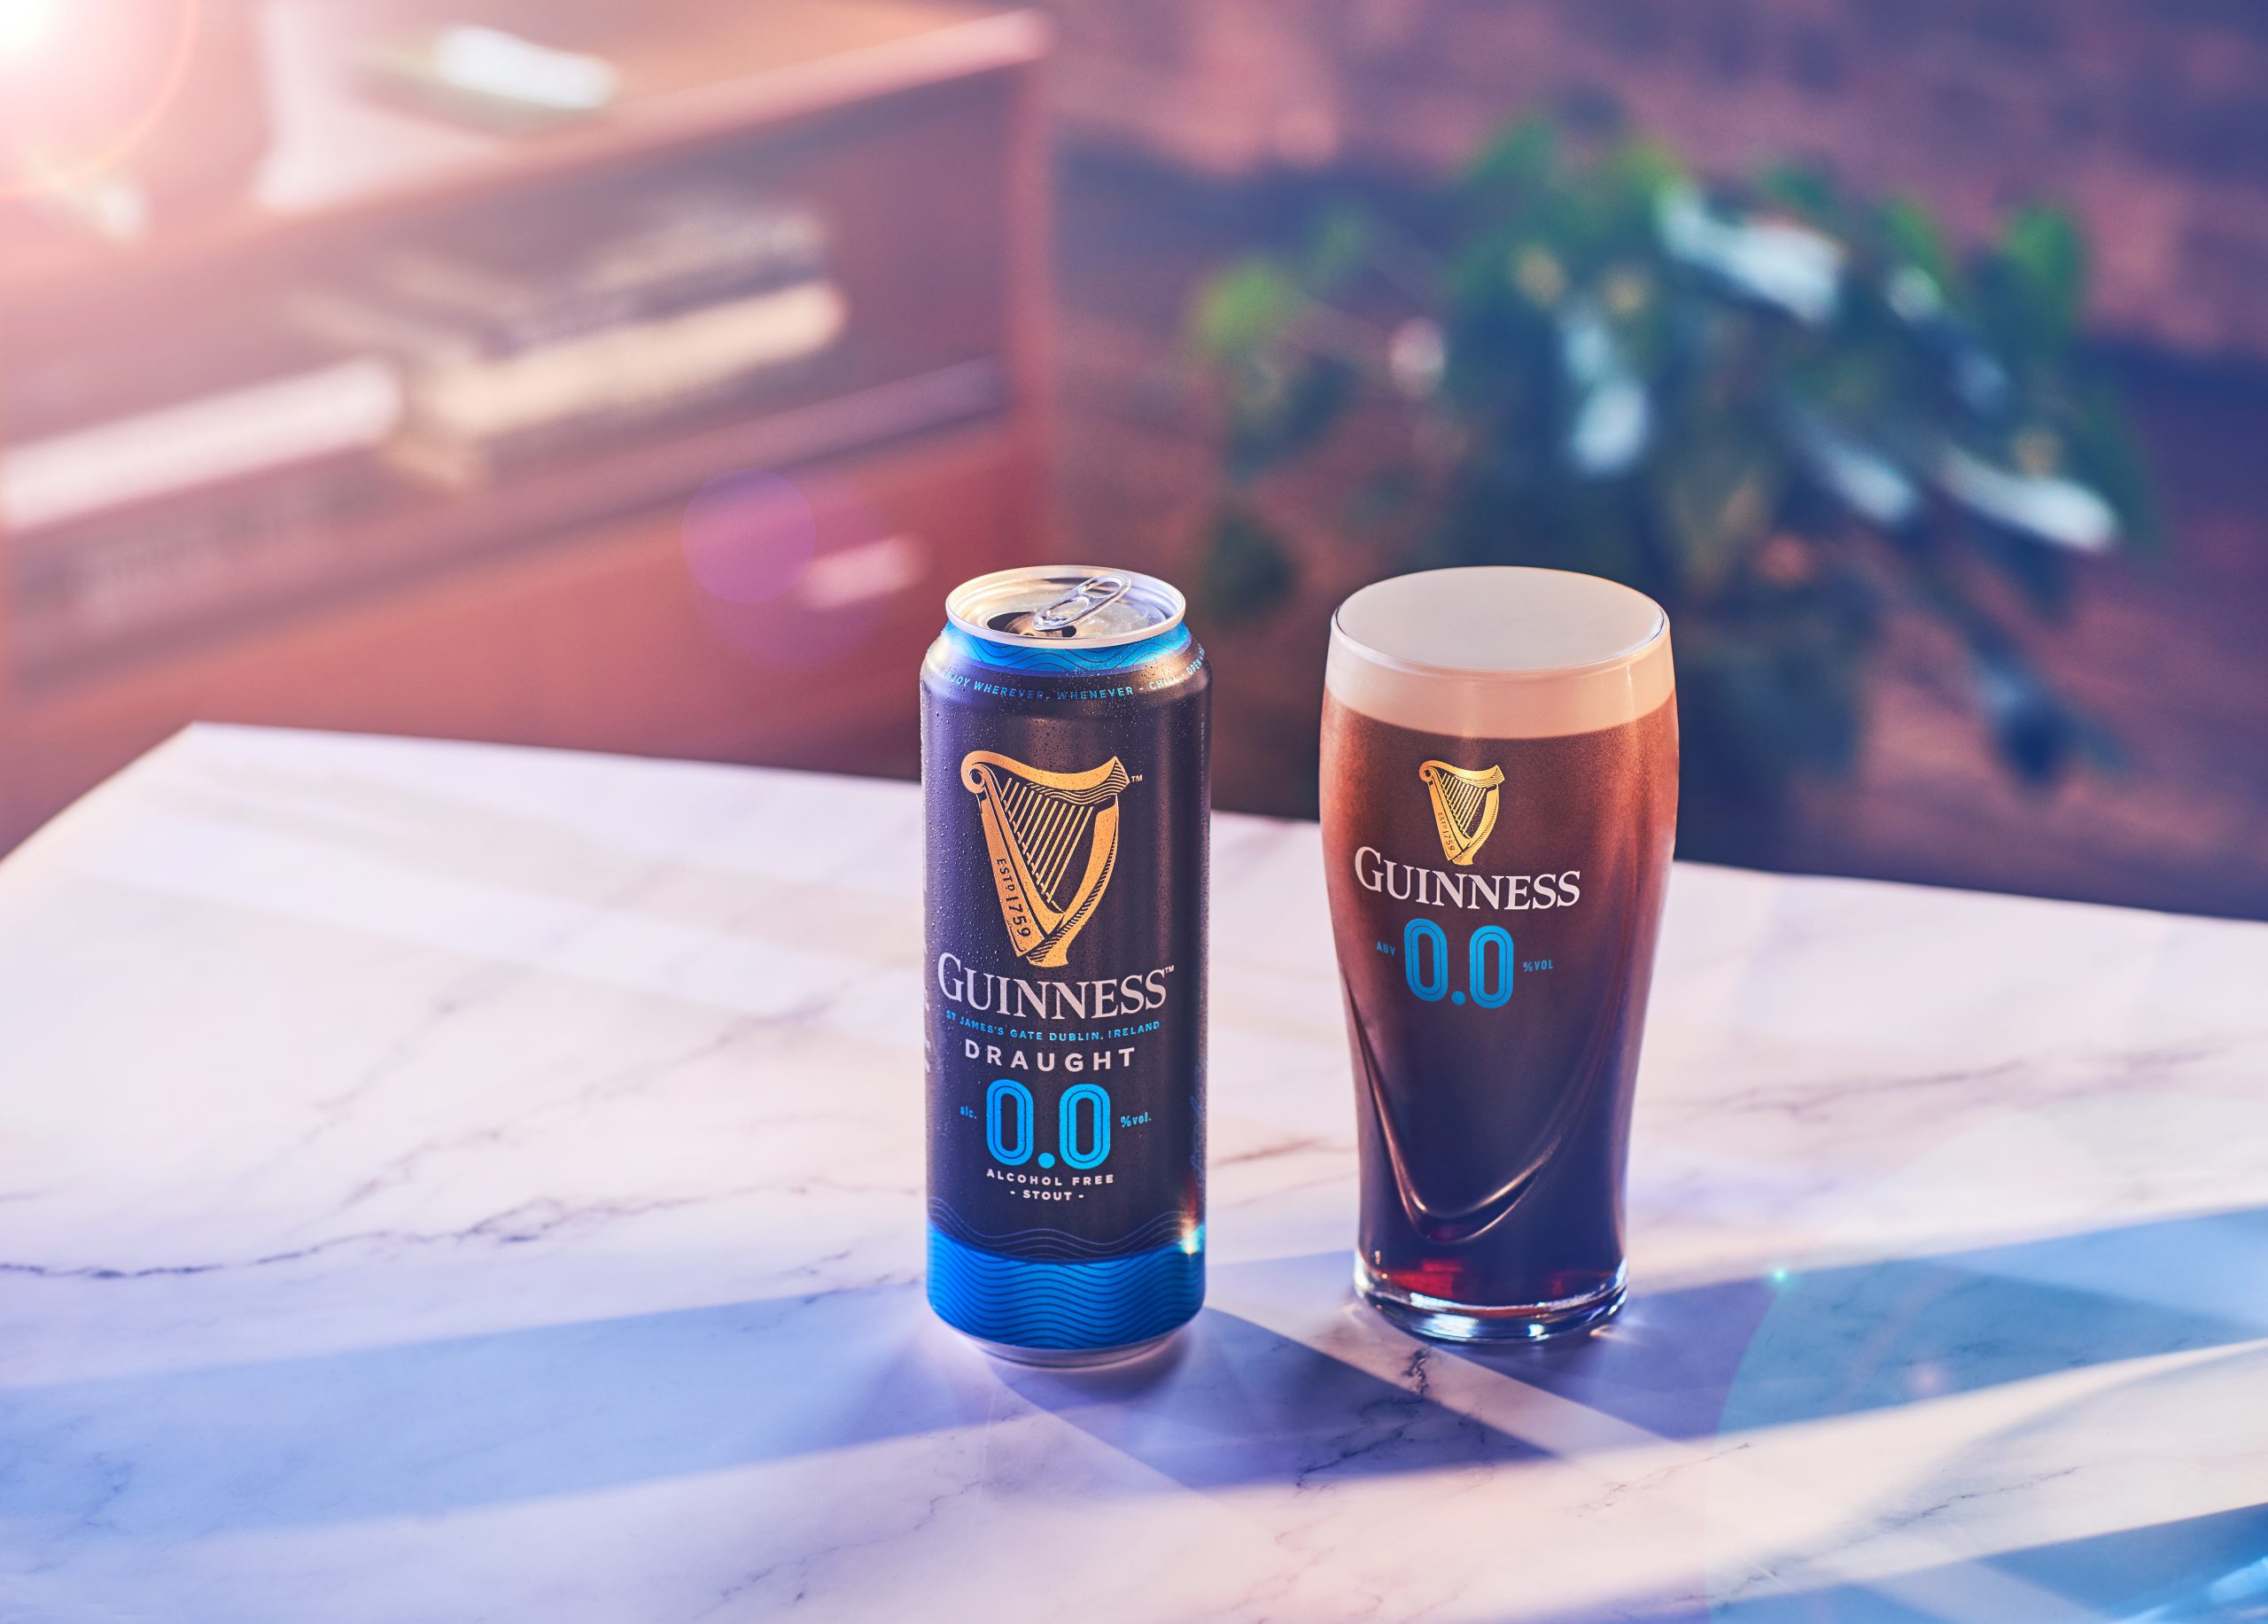 New Guinness 0.0 recalled over contamination fears